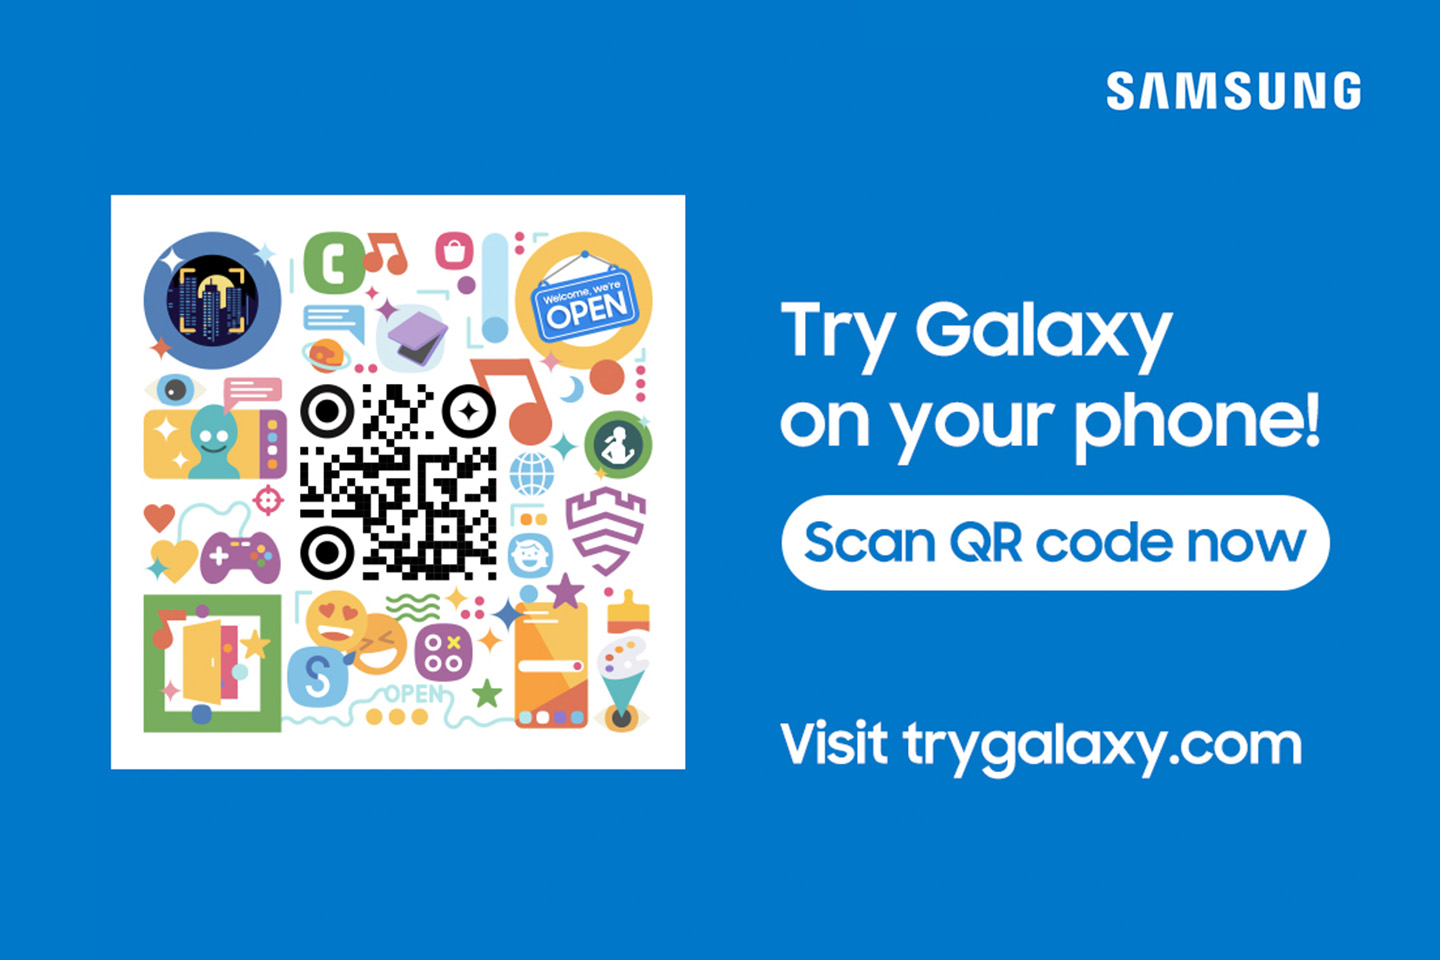 Try Galaxy App Updates and QR Code to Download